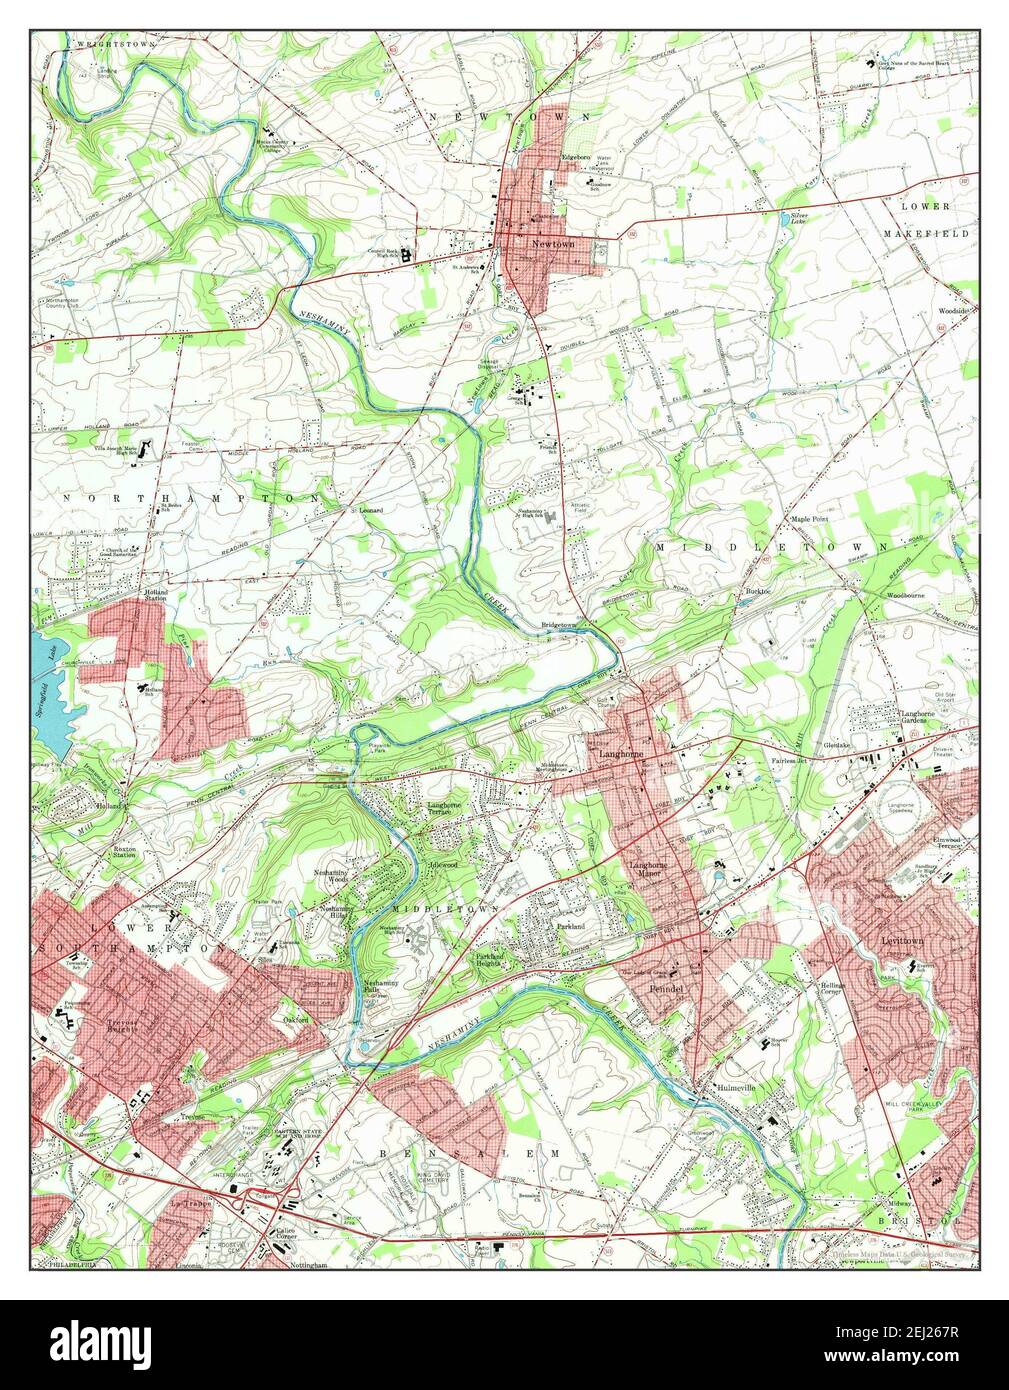 Langhorne, Pennsylvania, map 1966, 1:24000, United States of America by Timeless Maps, data U.S. Geological Survey Stock Photo